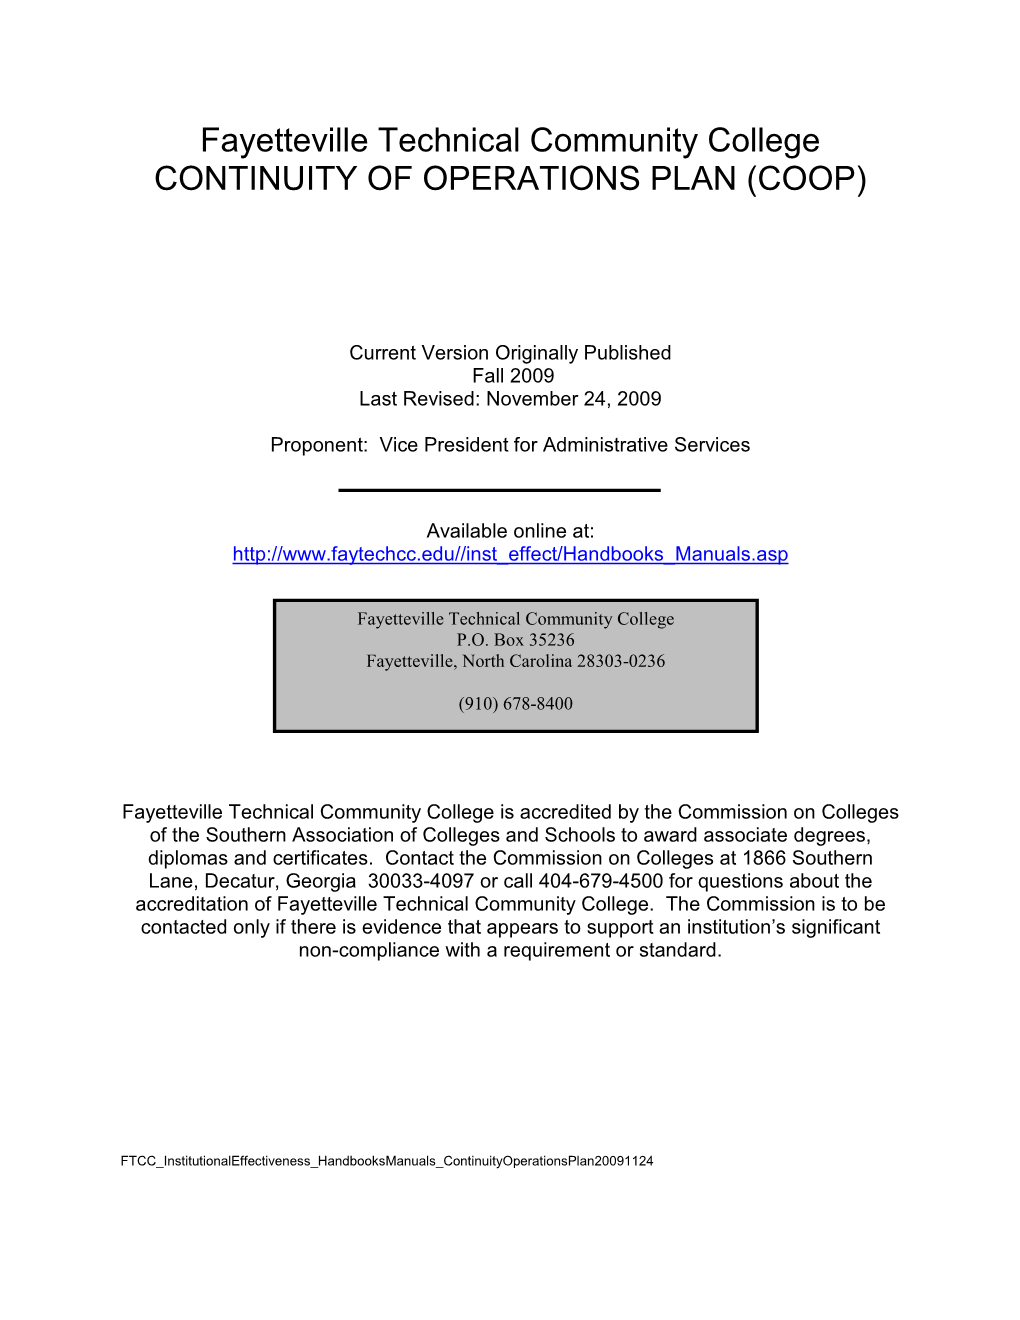 Continuity of Operations Plan (Coop)